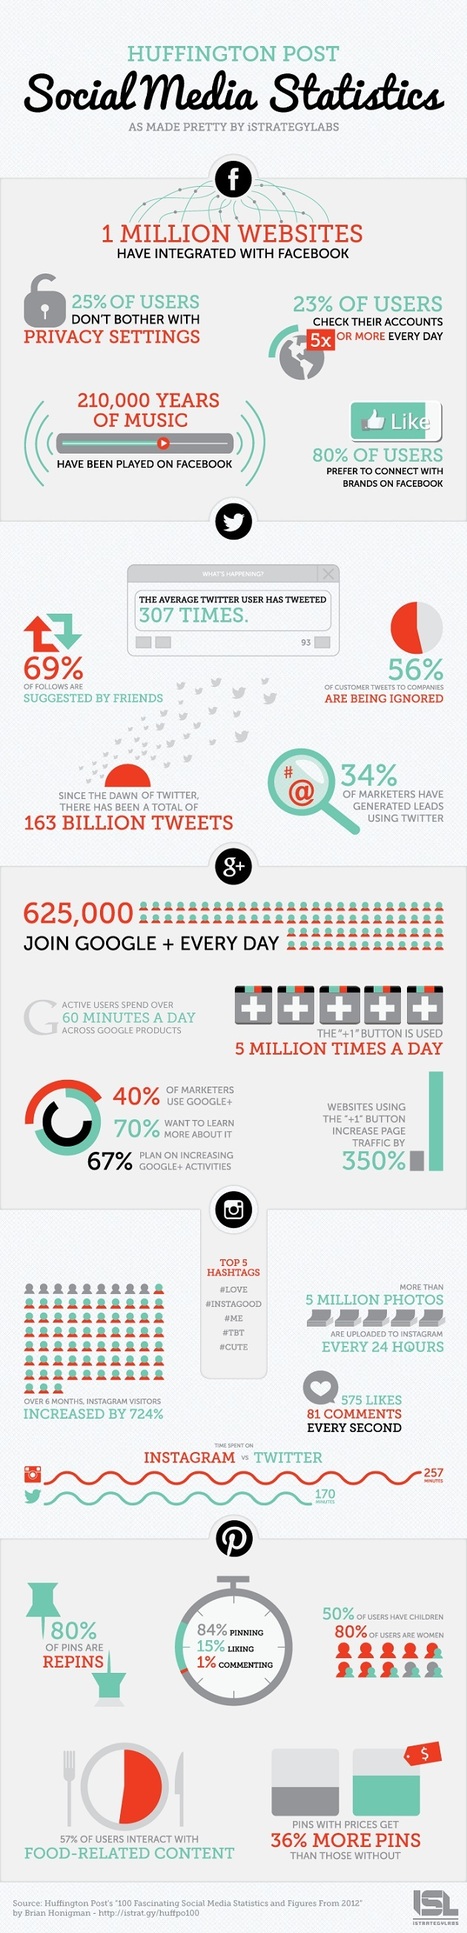 Infographic: 365 Days of Social Media | MarketingHits | Scoop.it